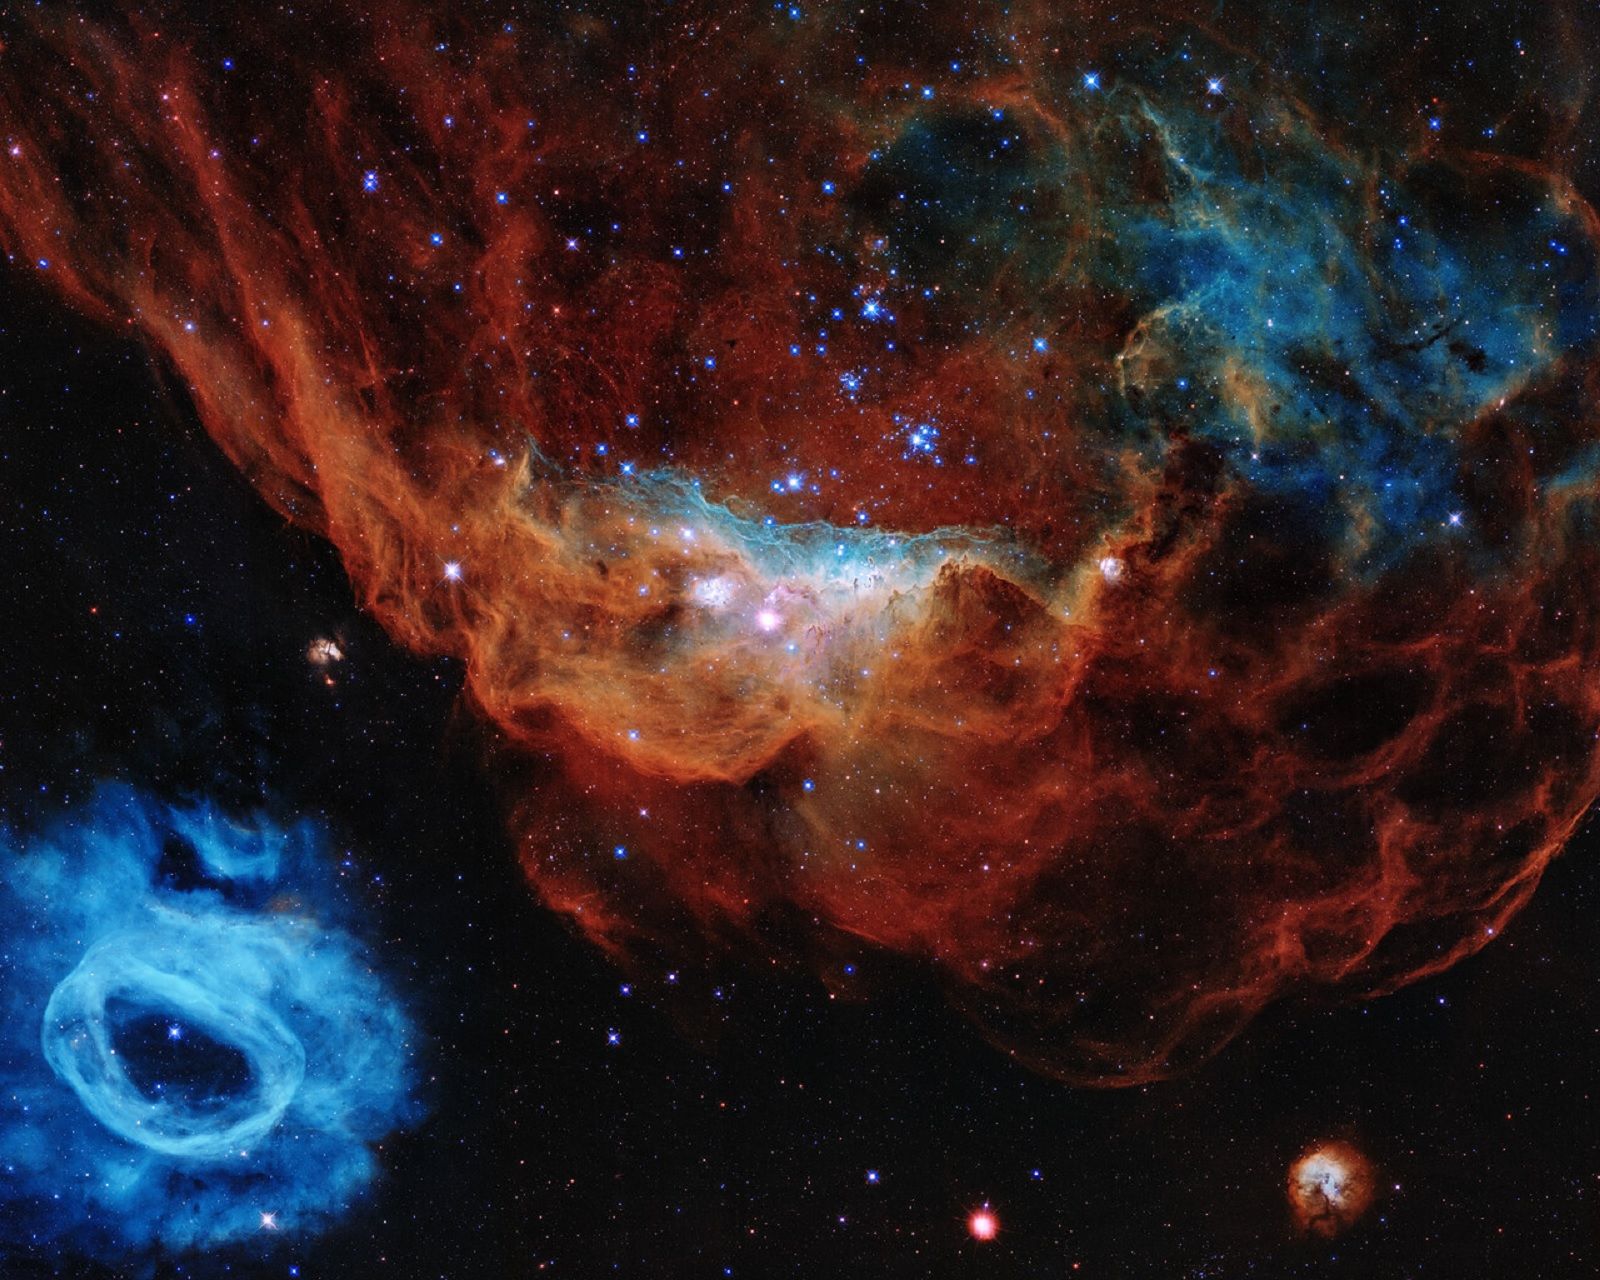 astounding images from the depths of the universe courtesy of the hubble space telescope photo 25